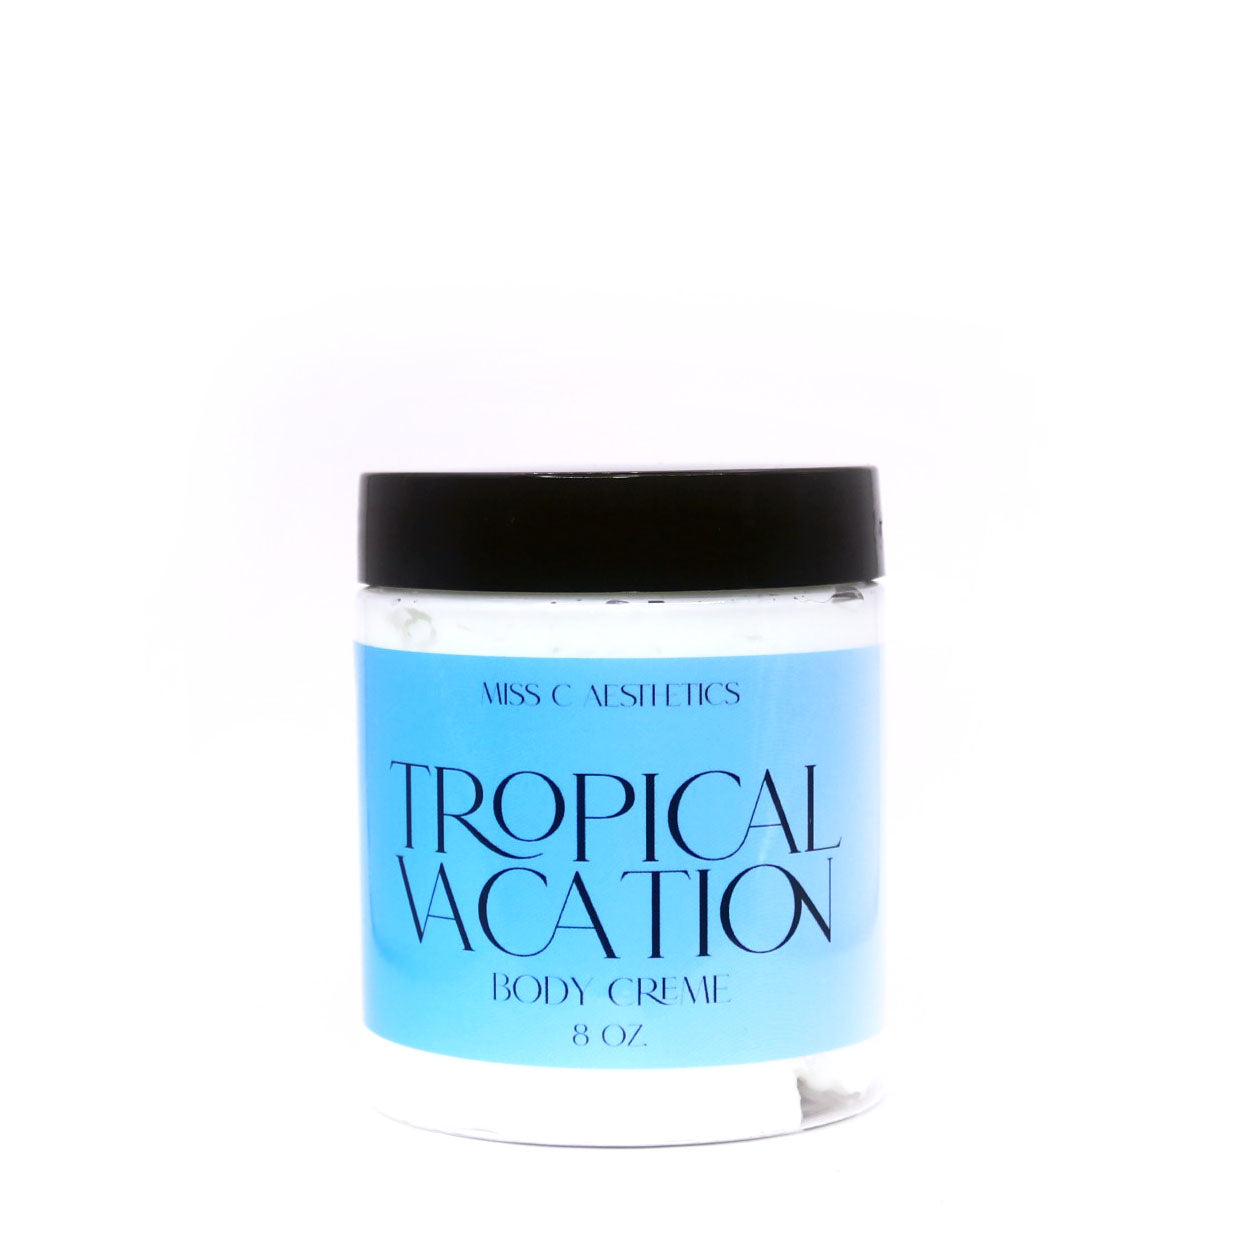 "Tropical Vacation" Whipped Body Cream